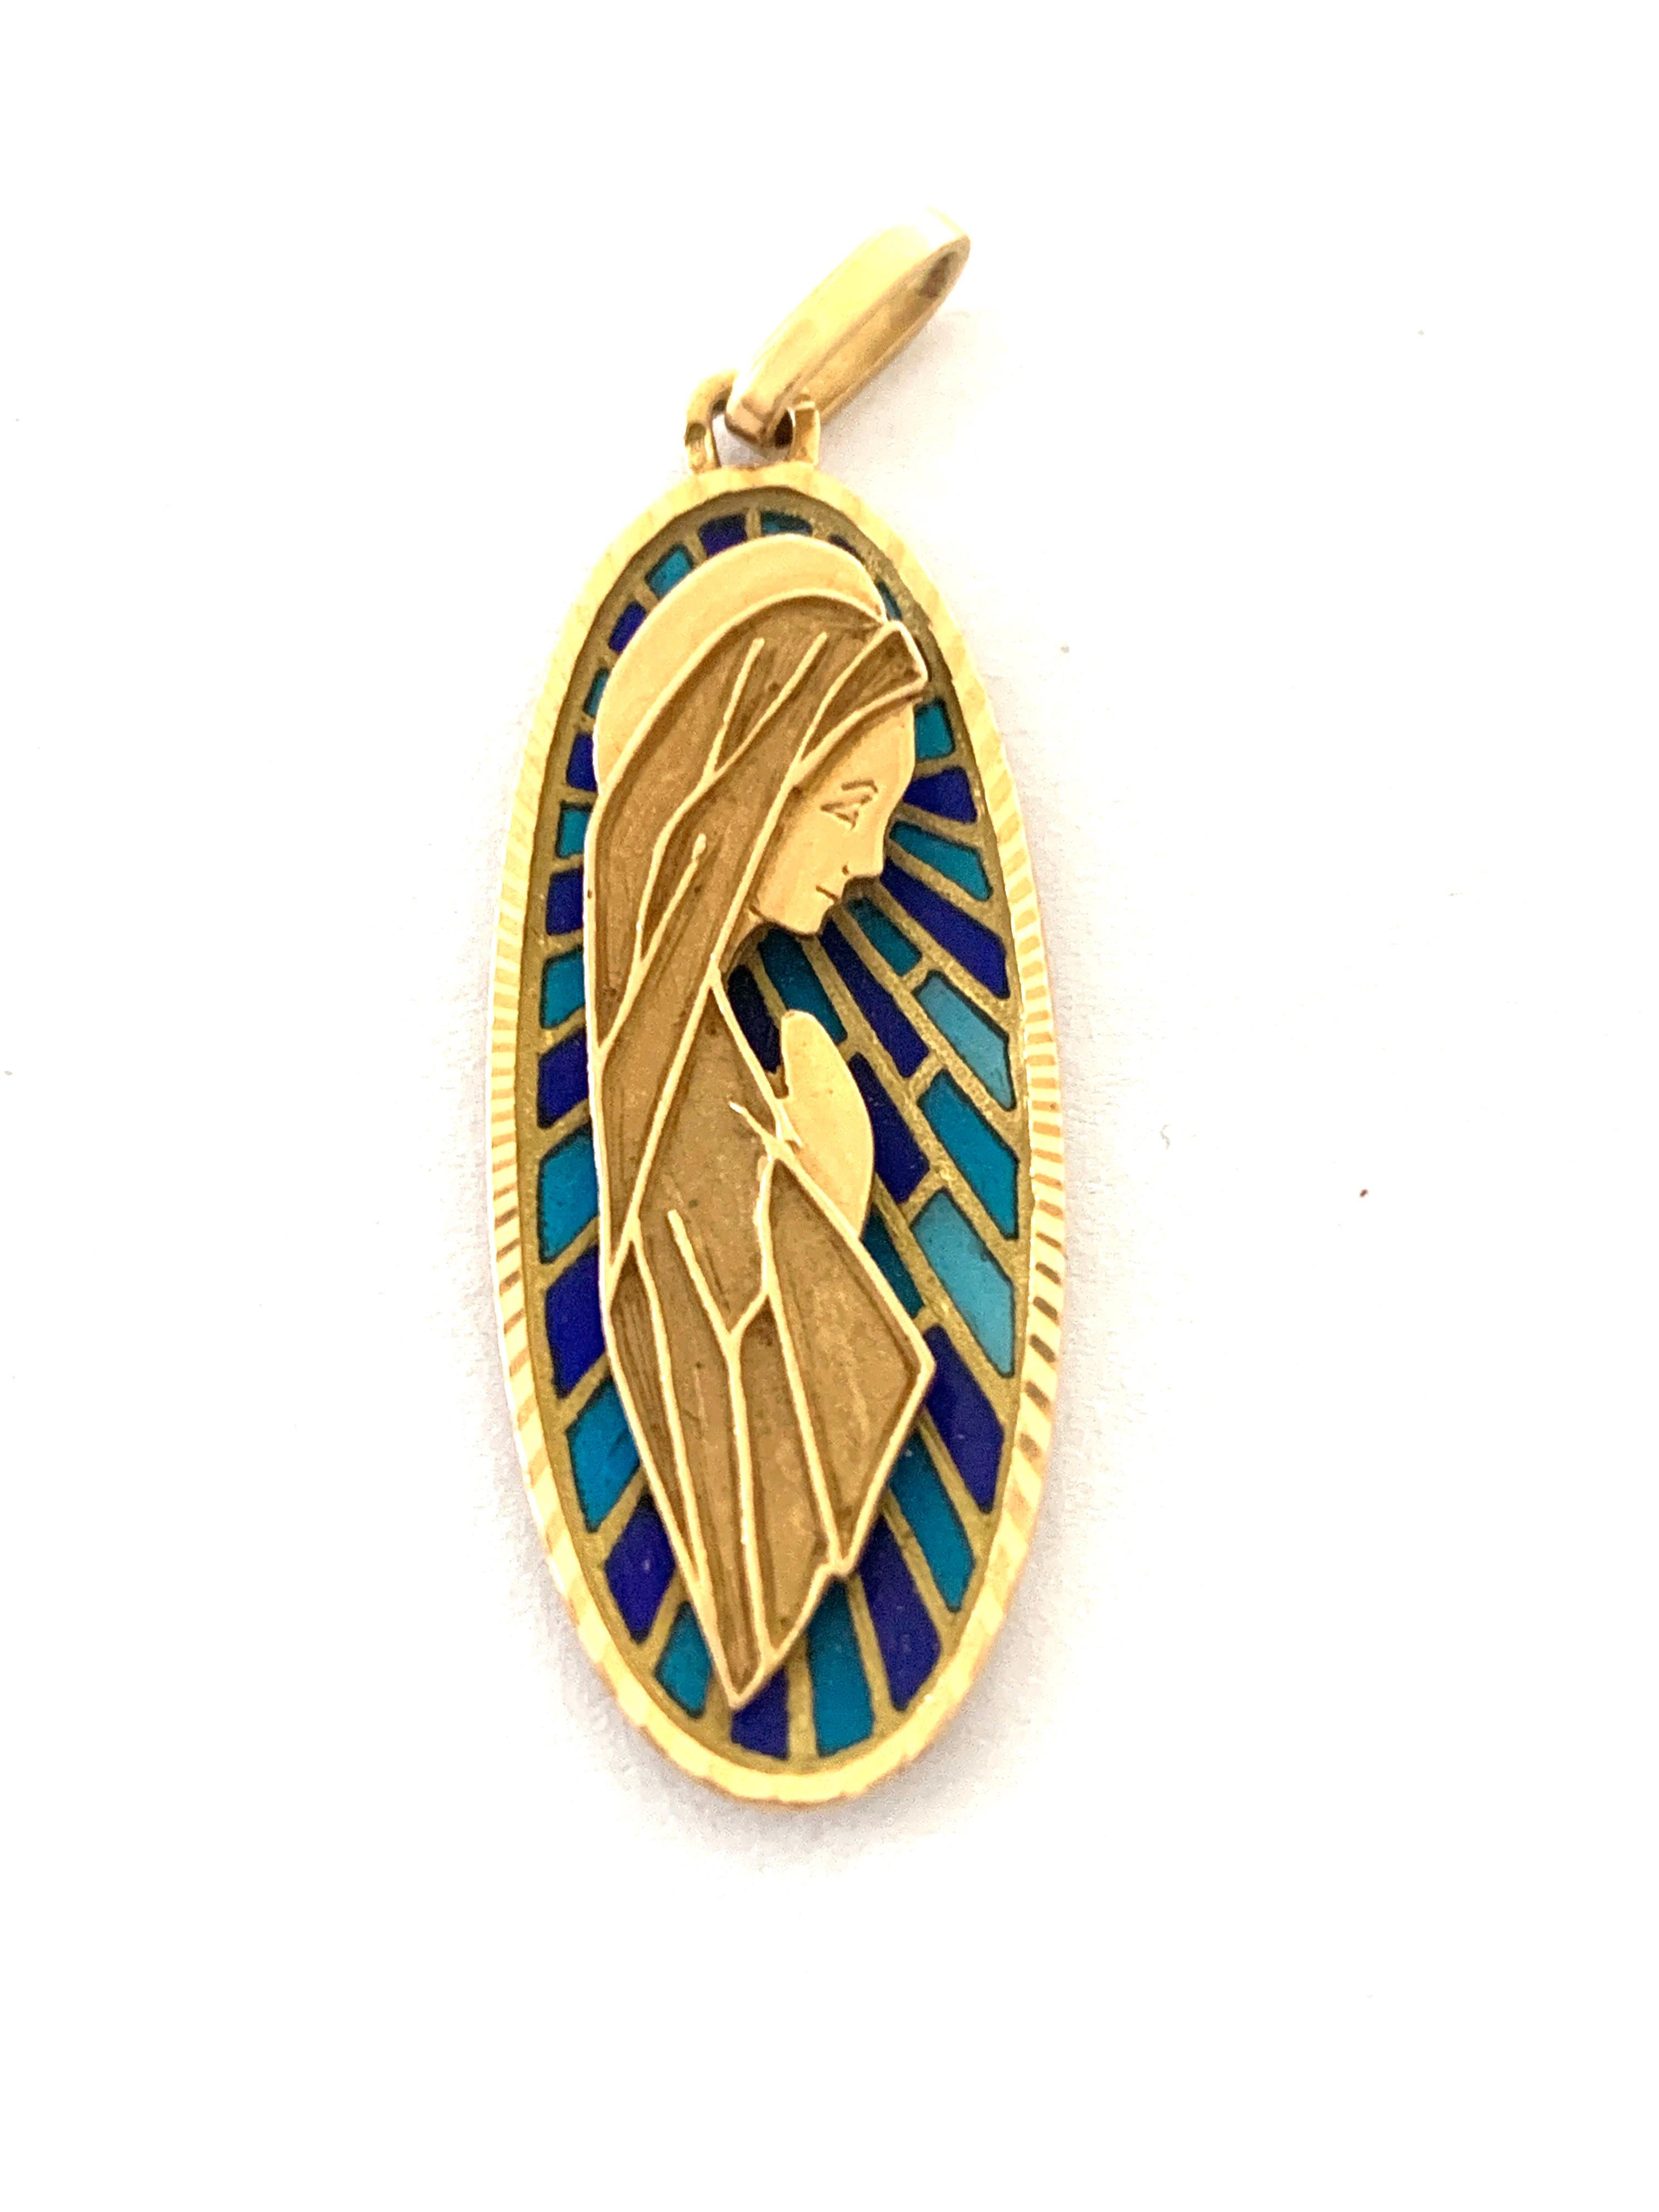 18ct Gold French Virgin Mary Pendant 
Colourful Aqua & Colbalt Blue surrounding enamel Enamel 
Stamped to the bail with the 
French Eagle mark for 18ct Gold 
Height  4.2 CM
Weight 4.3 Grams